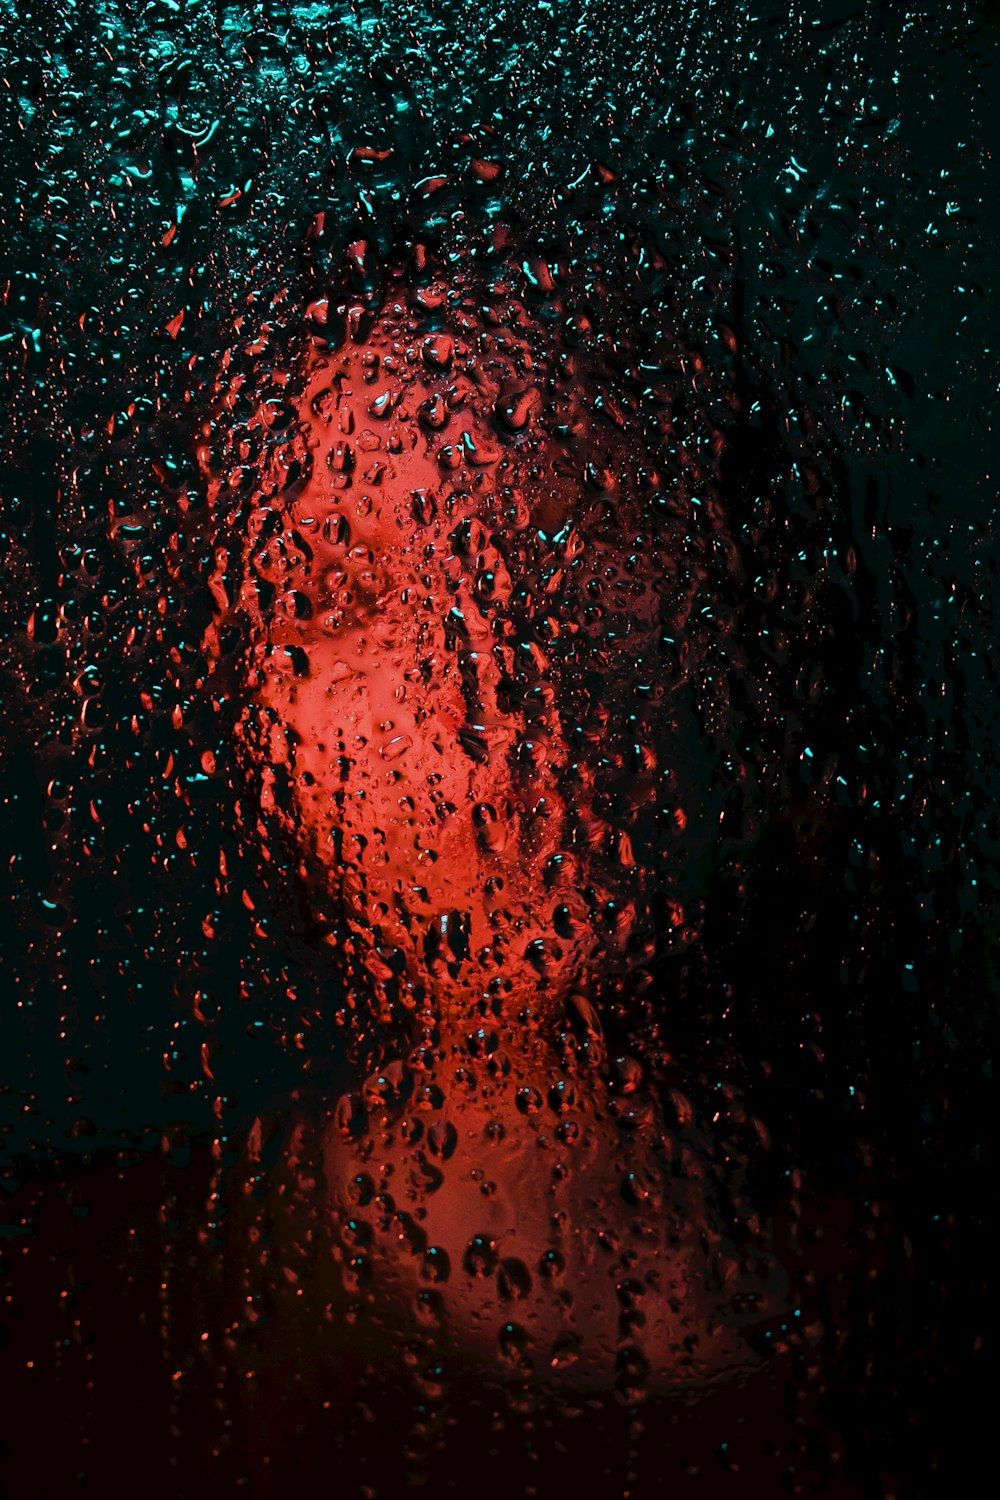 water droplets on glass during night time